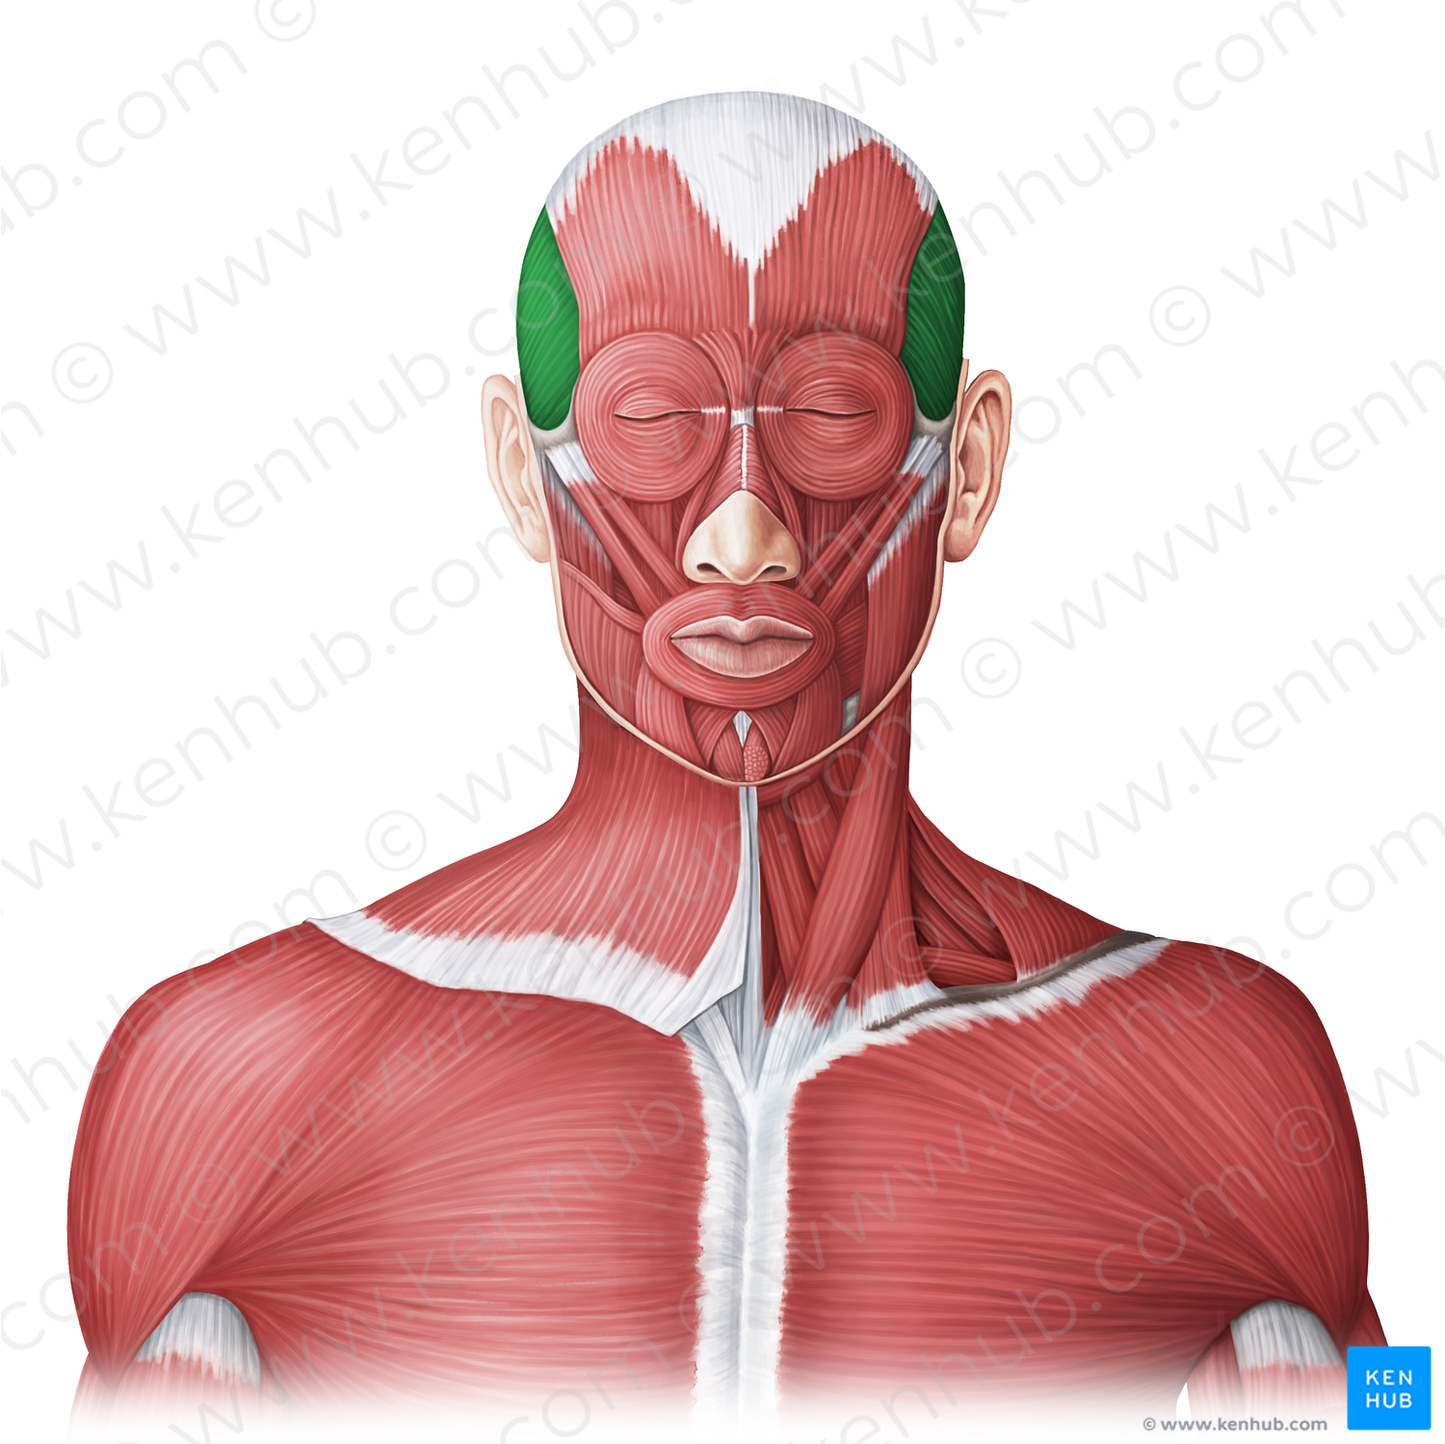 Temporalis muscle (#20005)